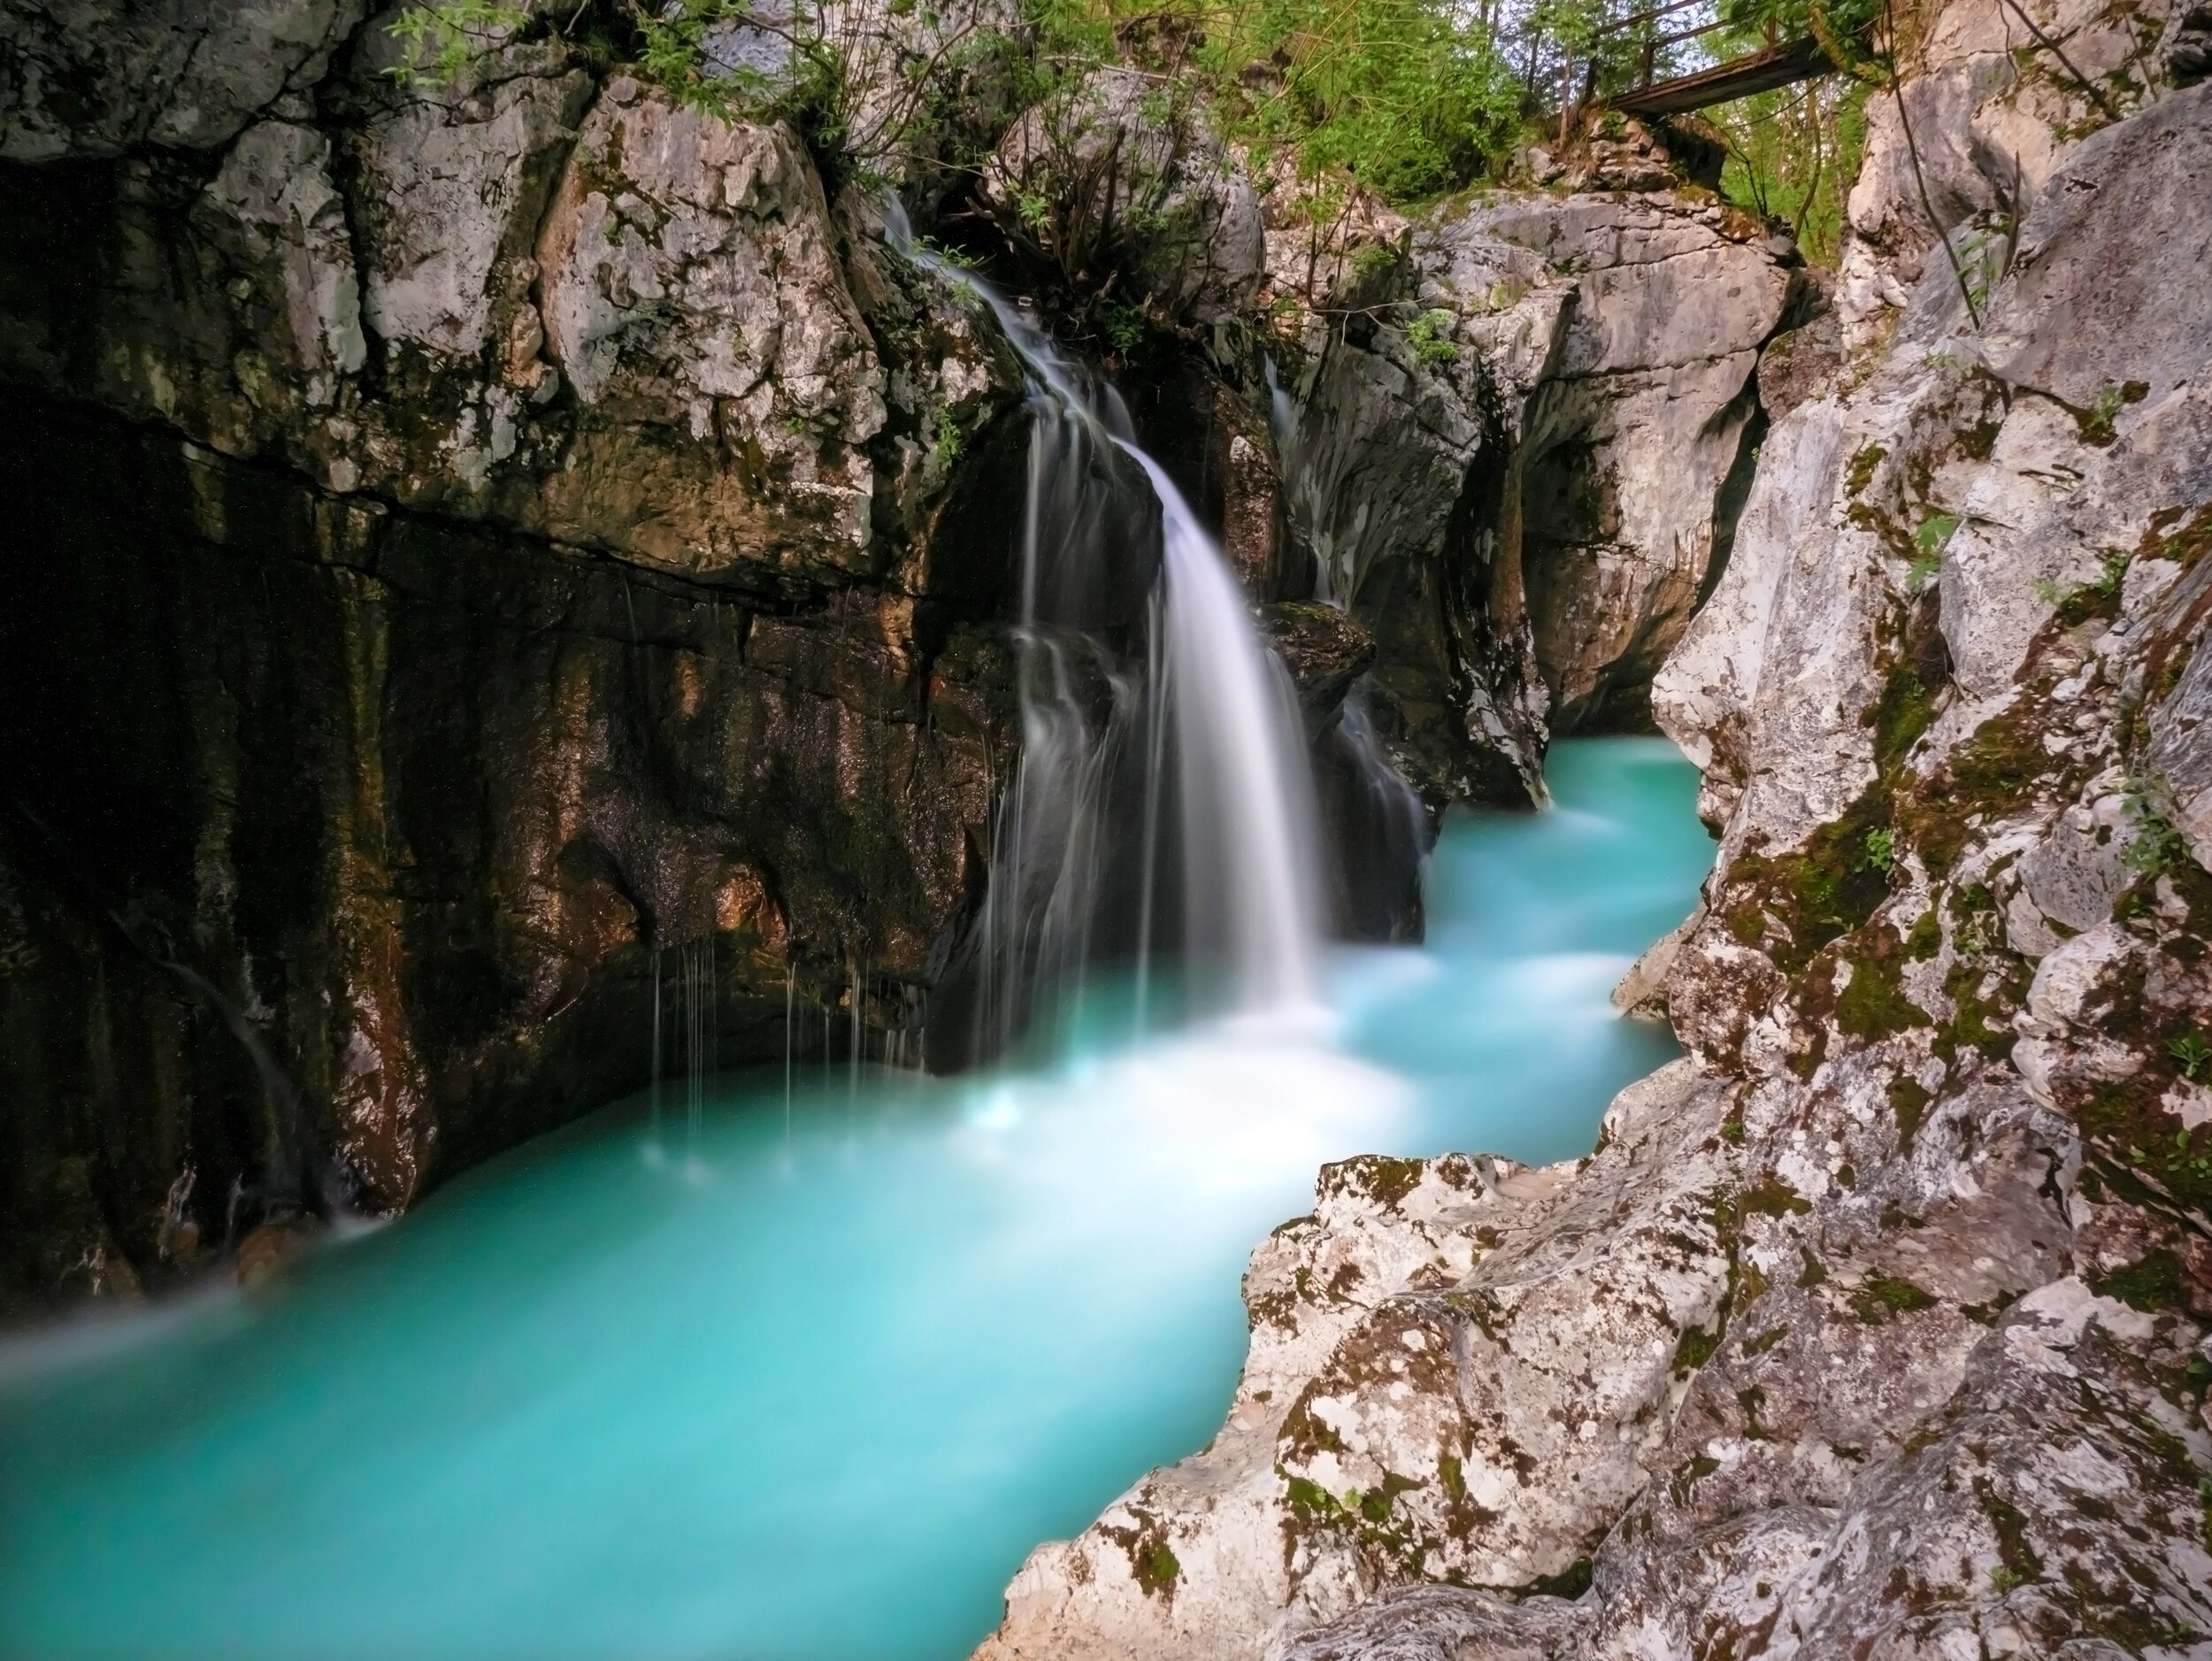 nominated-a-long-exposure-photo-of-a-gorgeous-emerald-green-river-and-its-gorge-and-a-small-waterfall_t20_GgoAQR.jpg